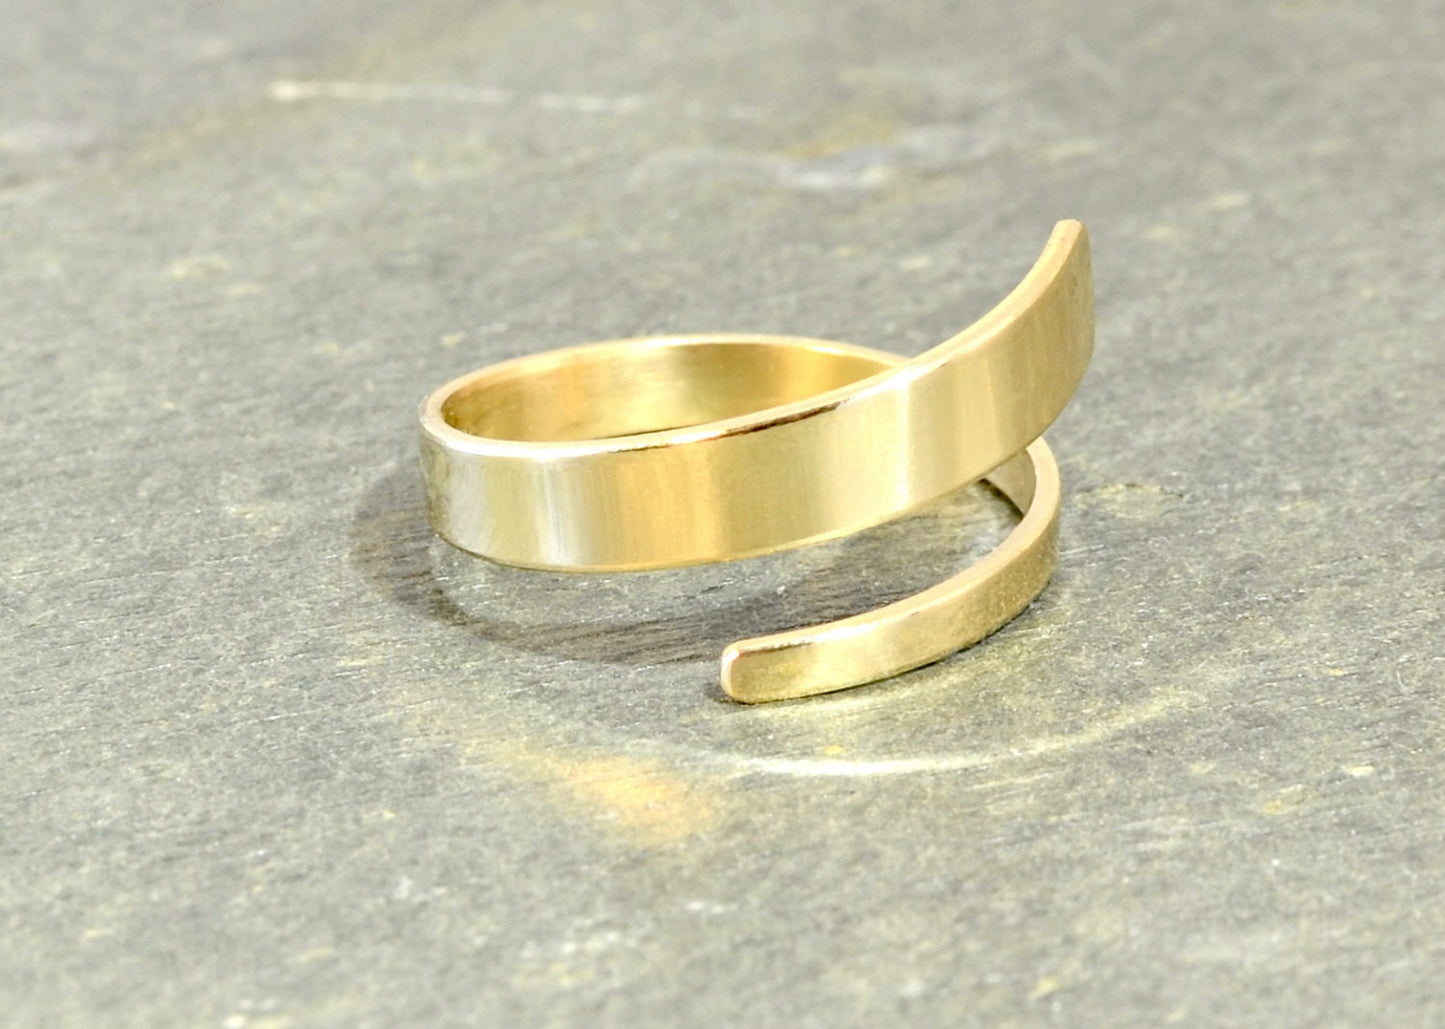 Yellow 14k Gold Dainty Bypass Ring in Simple Modern Style